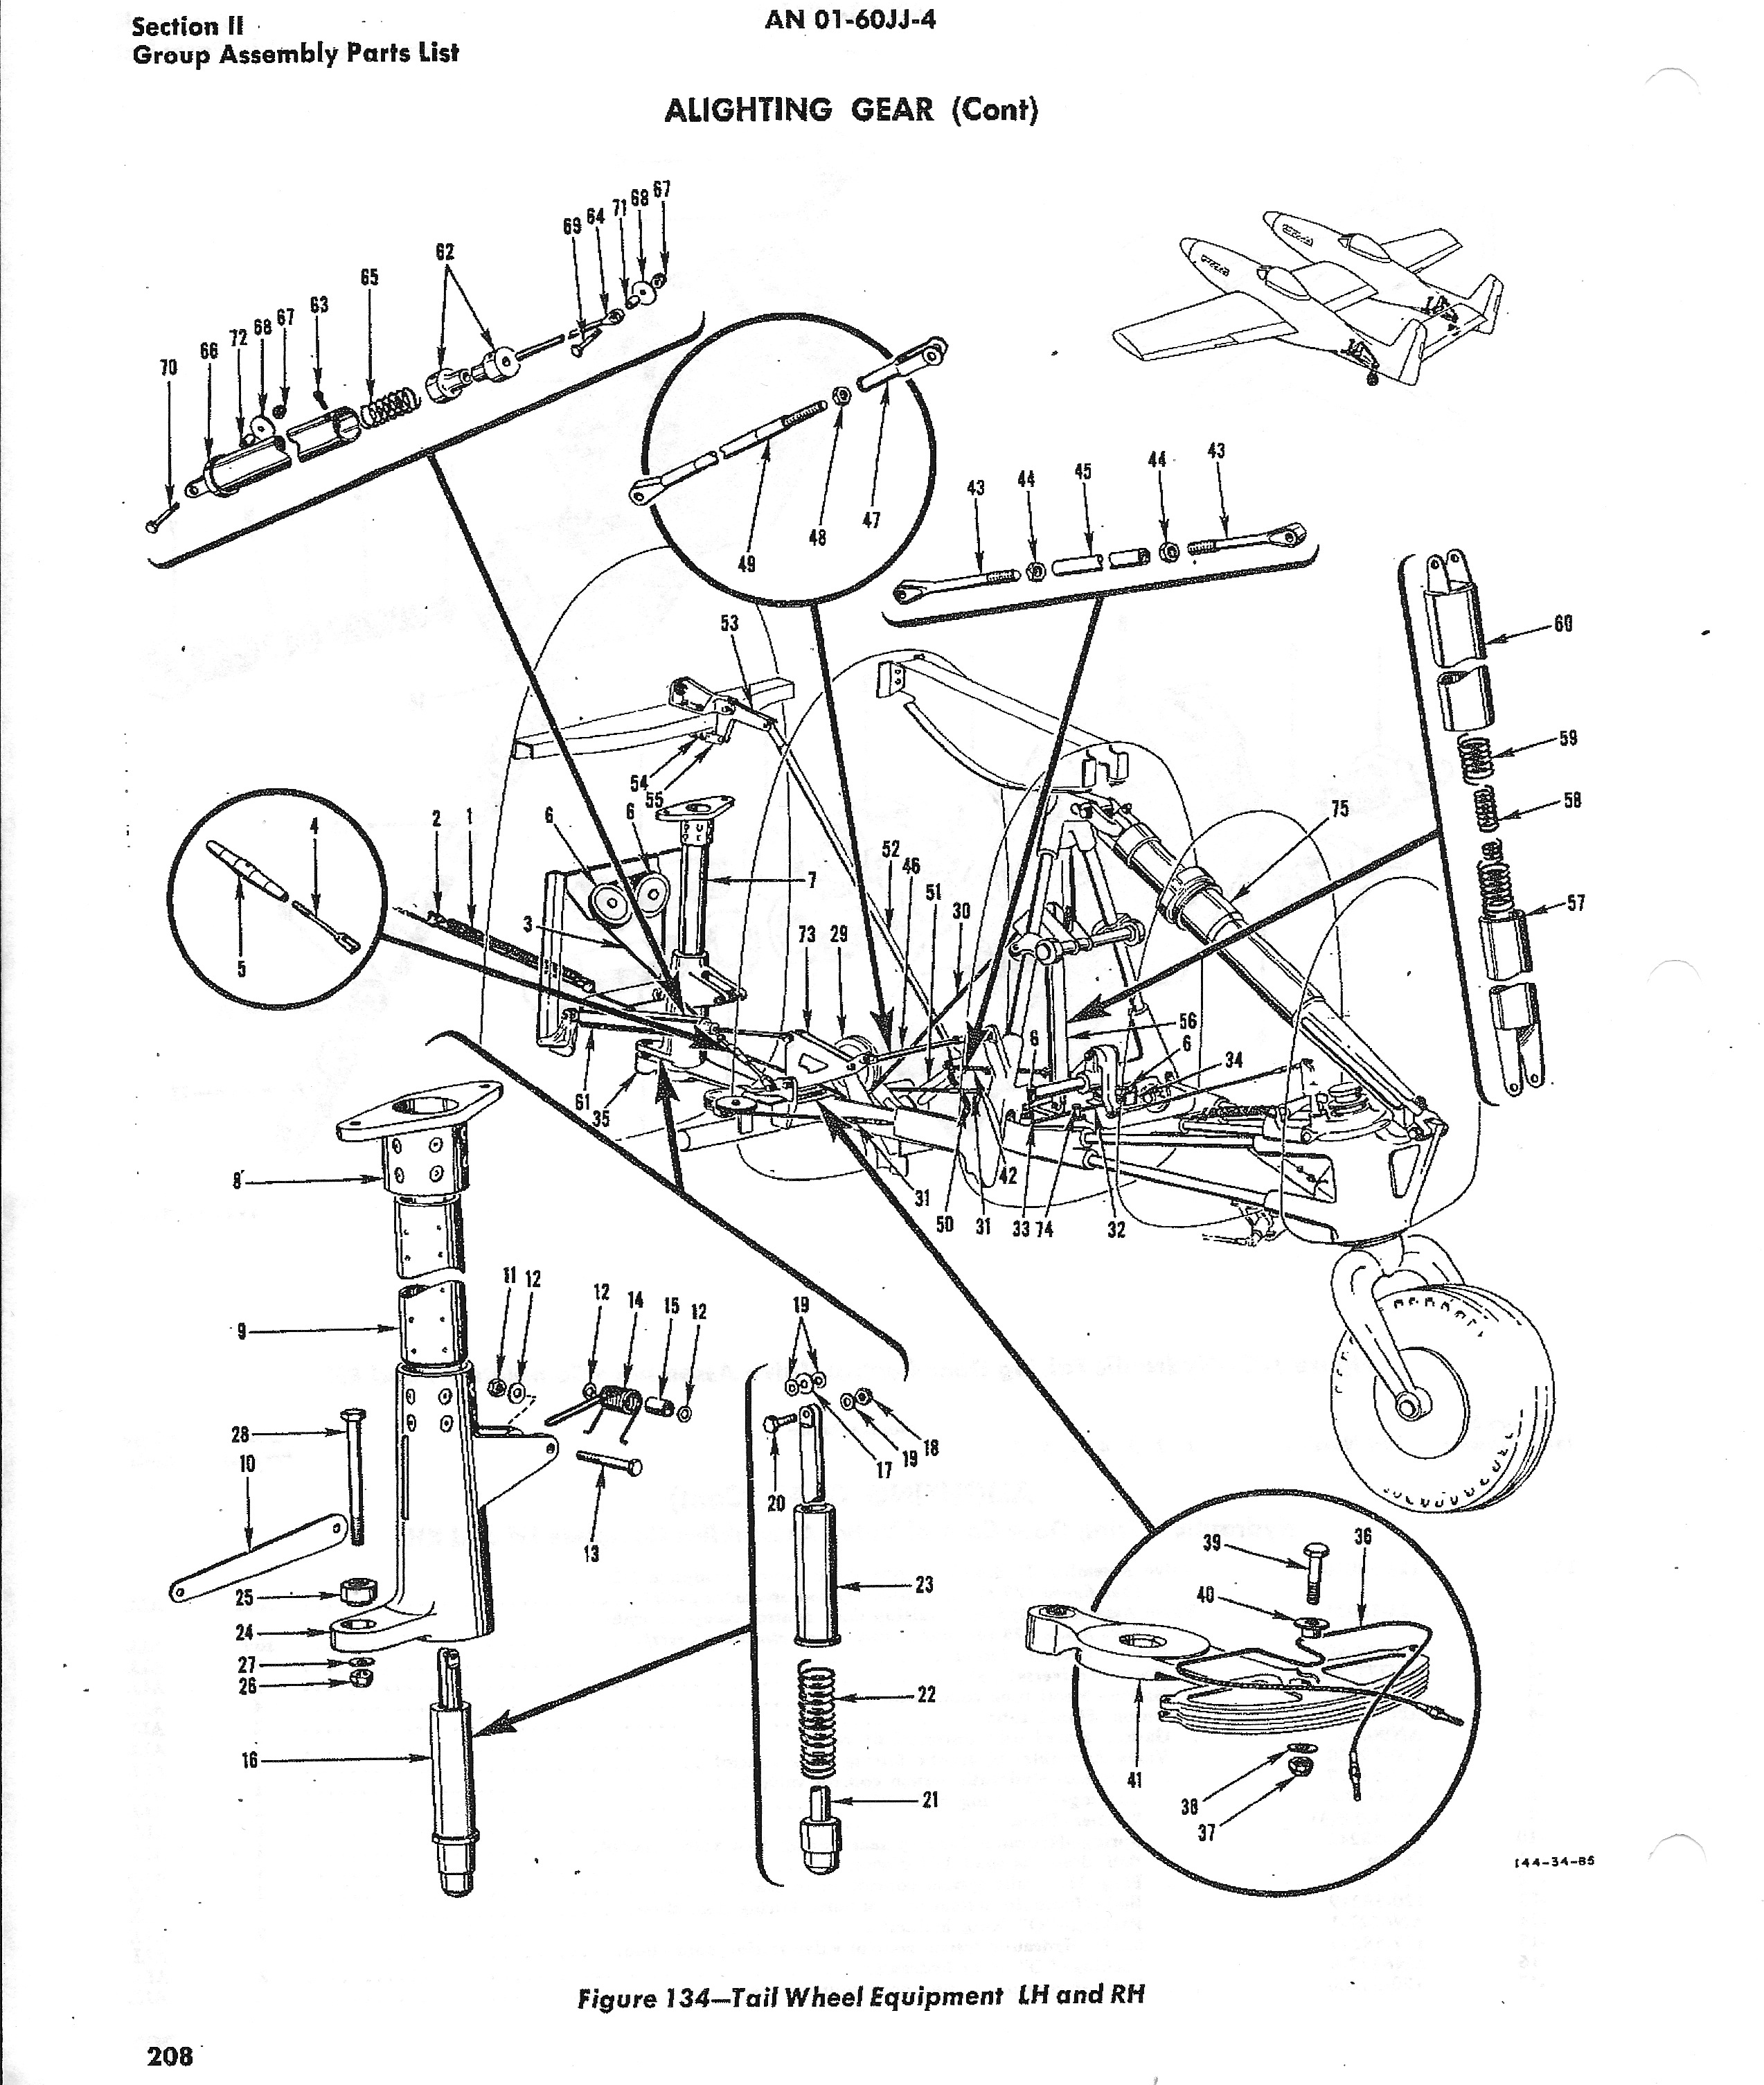 A good view from the Illustrated Parts Manual showing the tail wheel assembly. (photo via Tom Reilly)